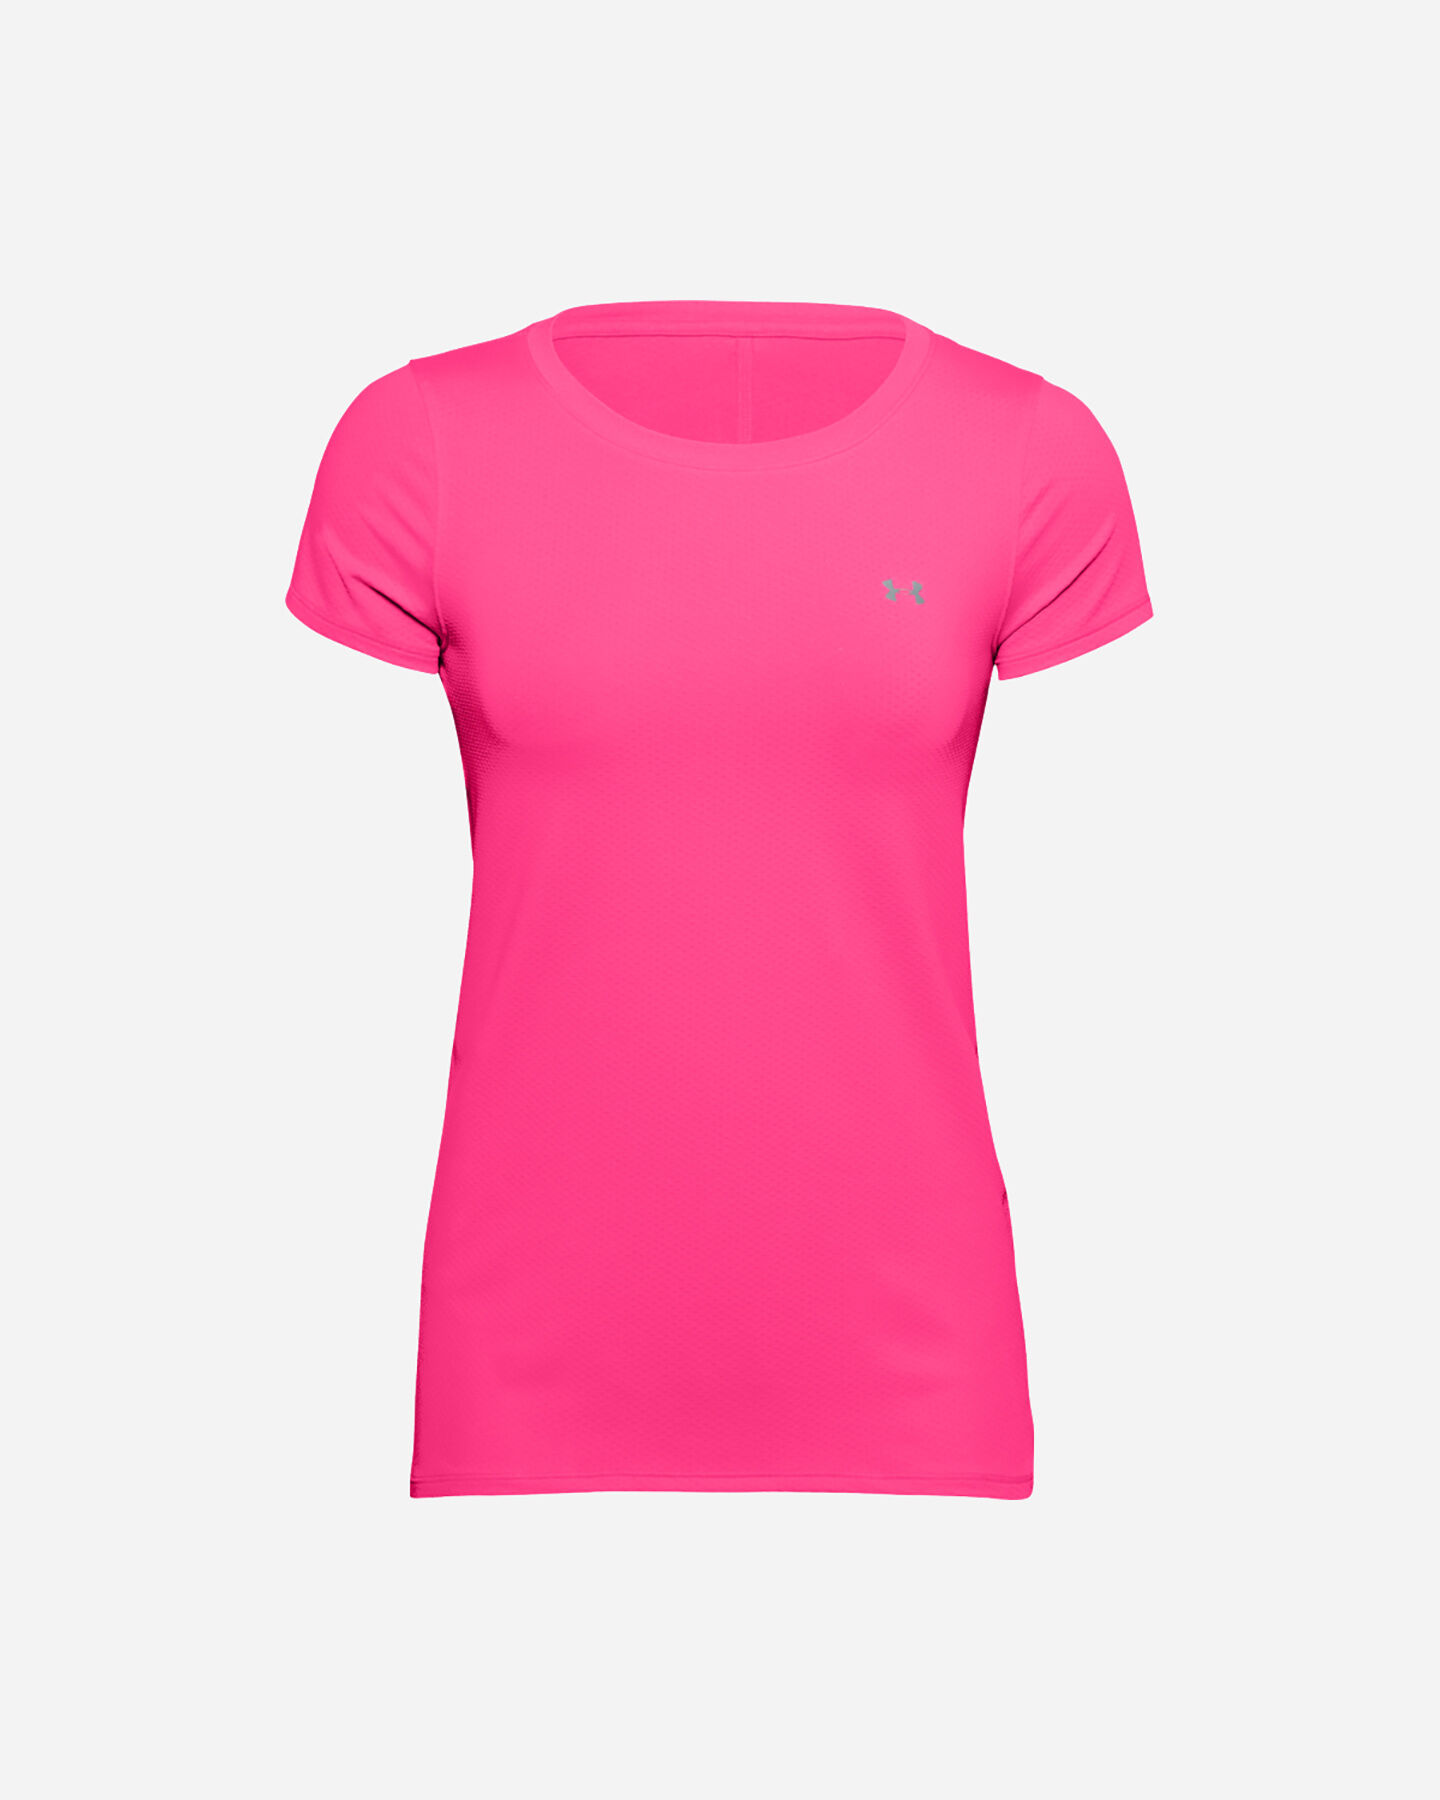  T-Shirt training UNDER ARMOUR MESH W S5228486|0653|XS scatto 0